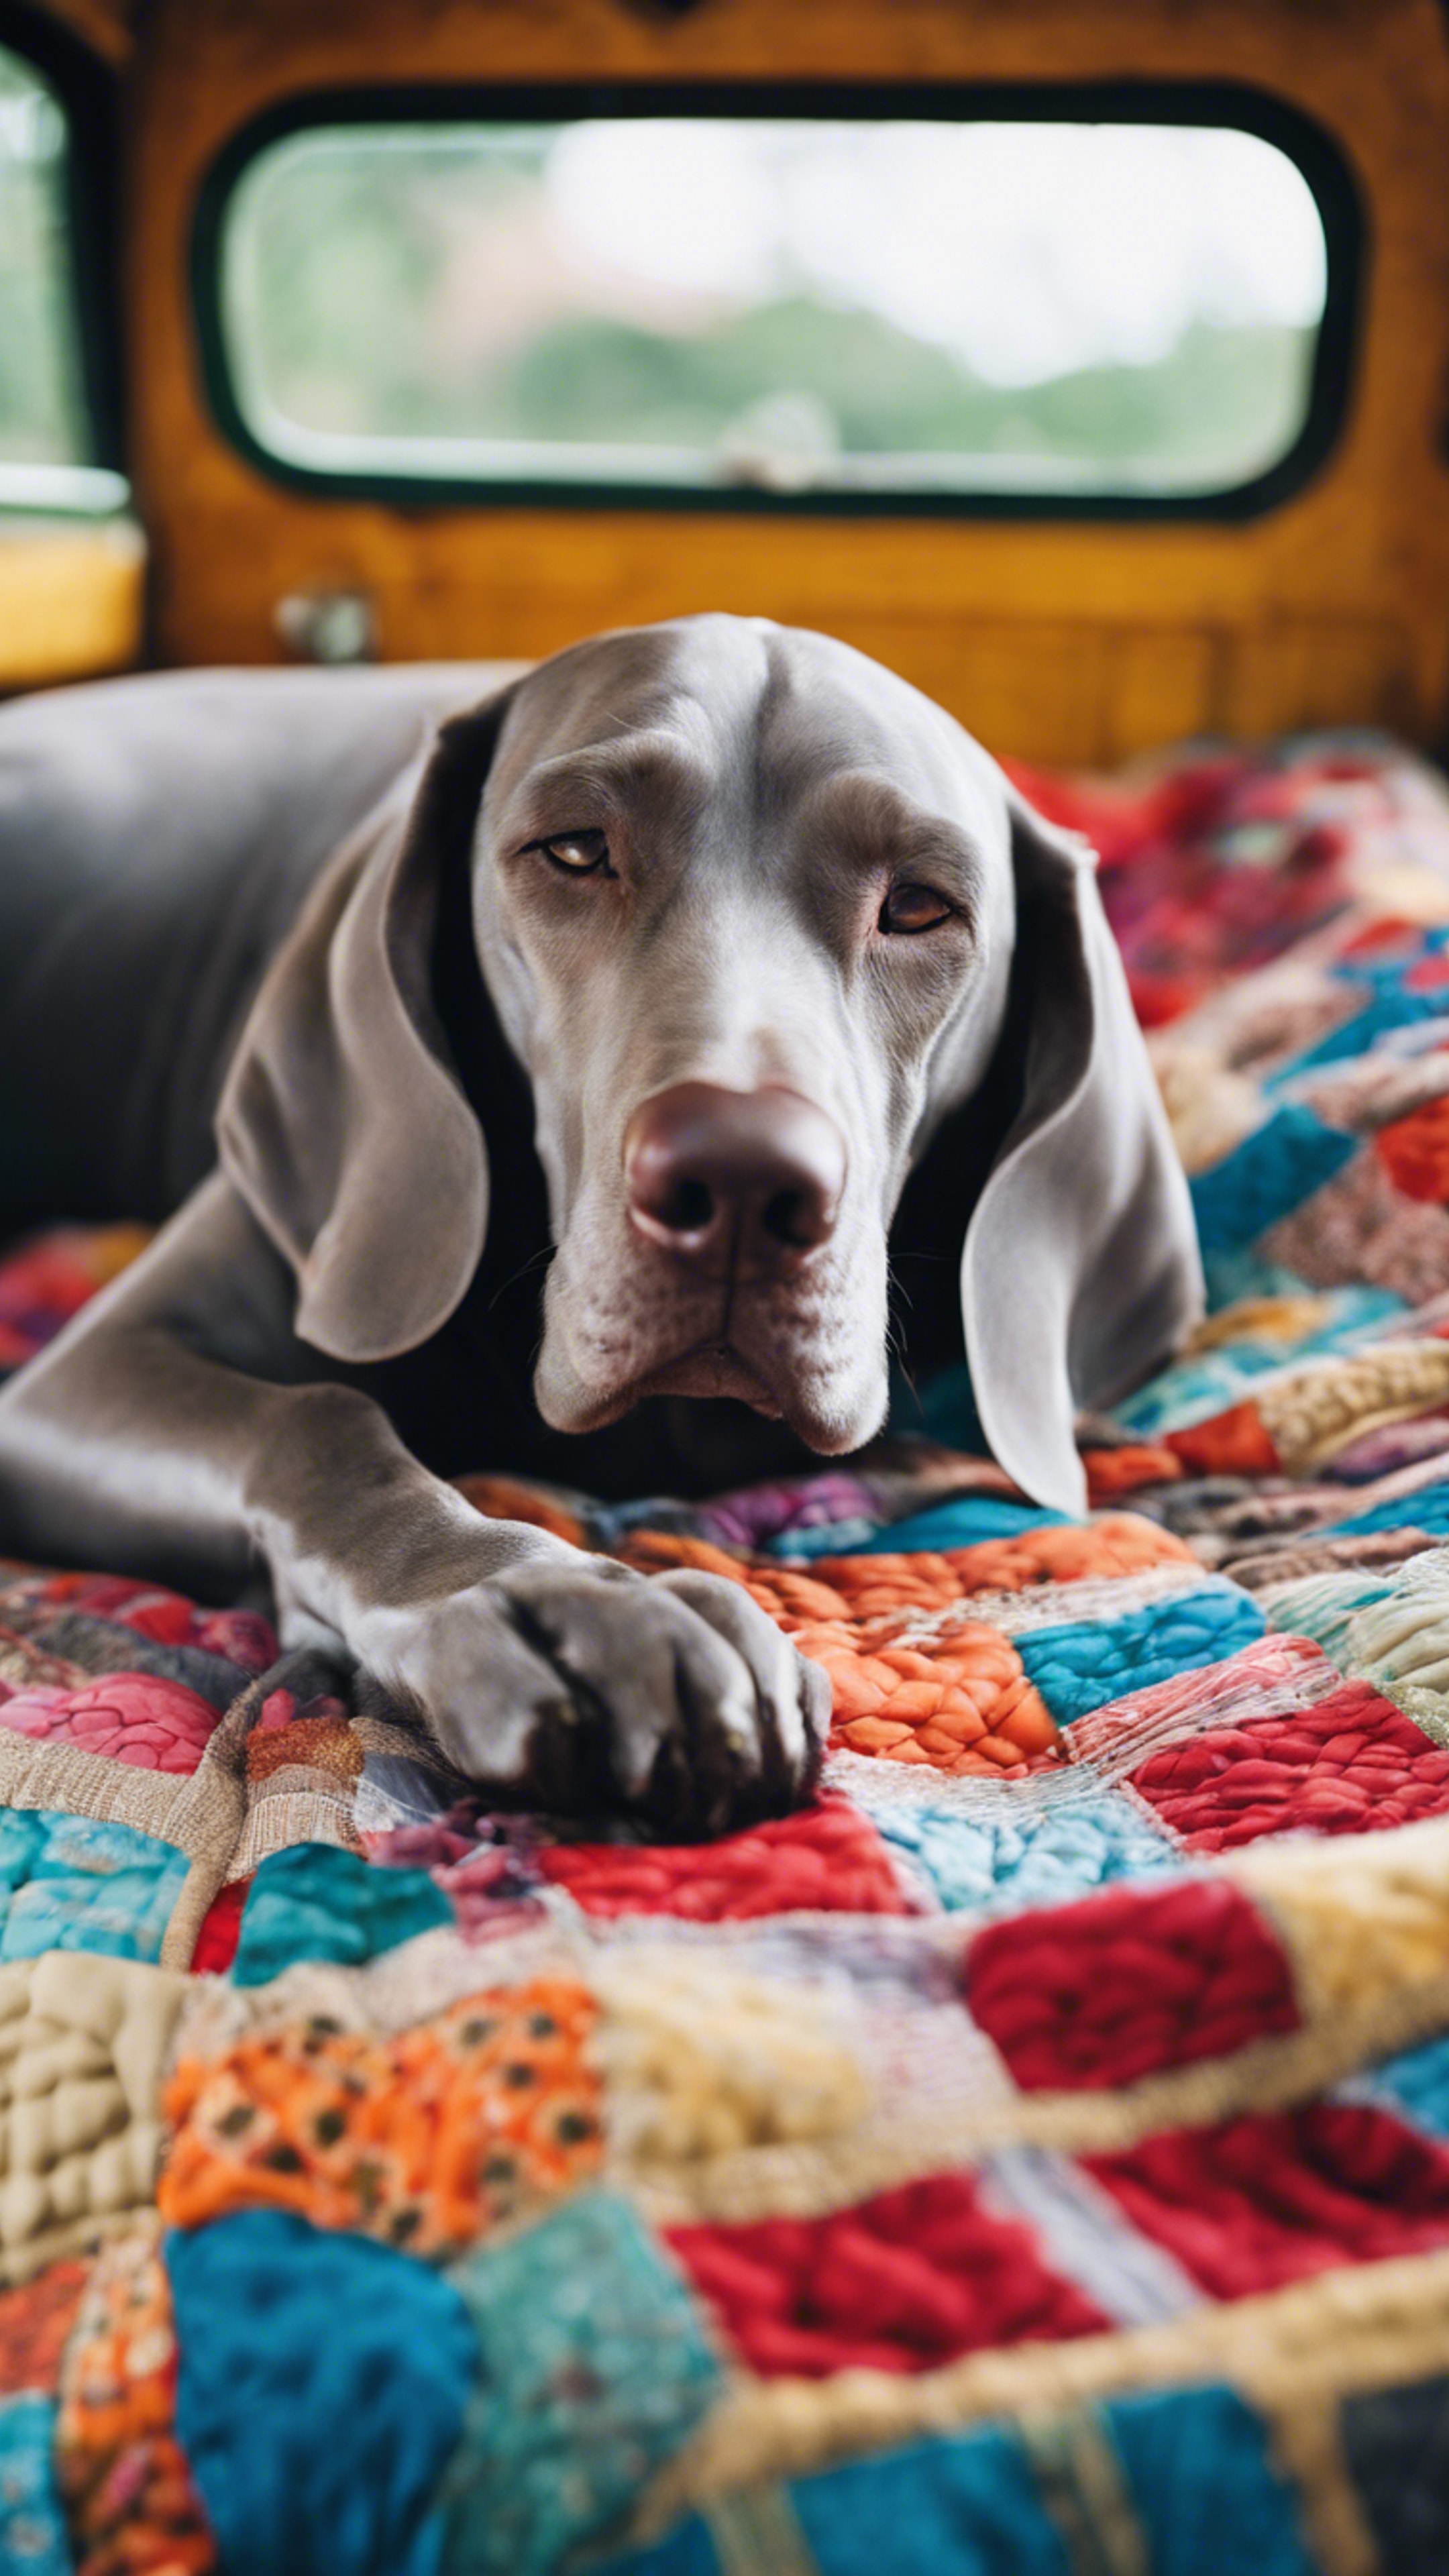 A sleepy Weimaraner lying in the back of a vintage truck bed, covered with a colorful patchwork quilt. Wallpaper[392368d8c78049ac8a4f]